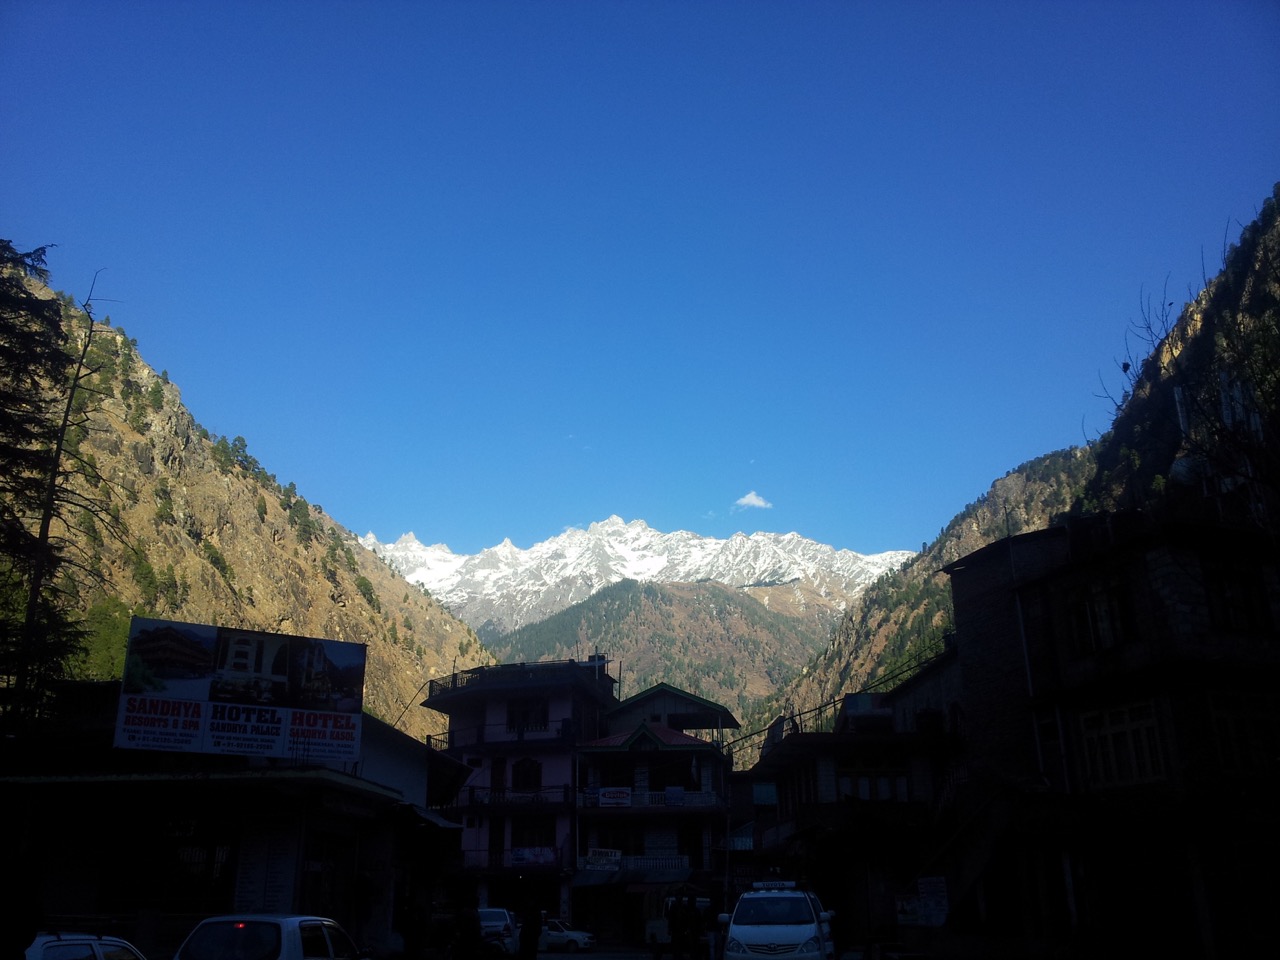 The snow clad Himalayas from the bridge that connects Old and New Kasol.